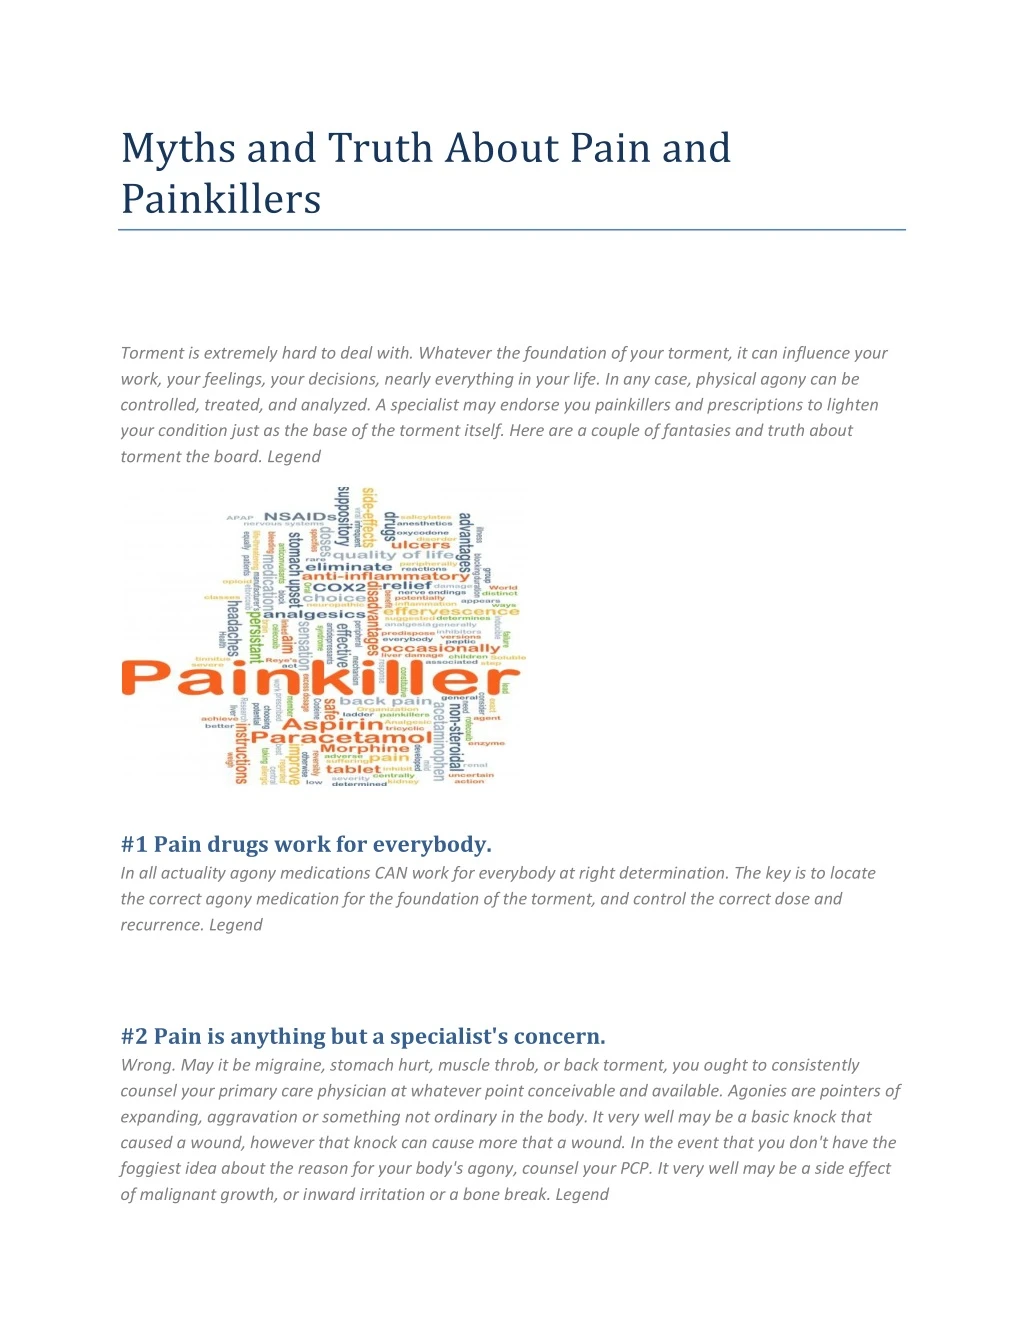 myths and truth about pain and painkillers